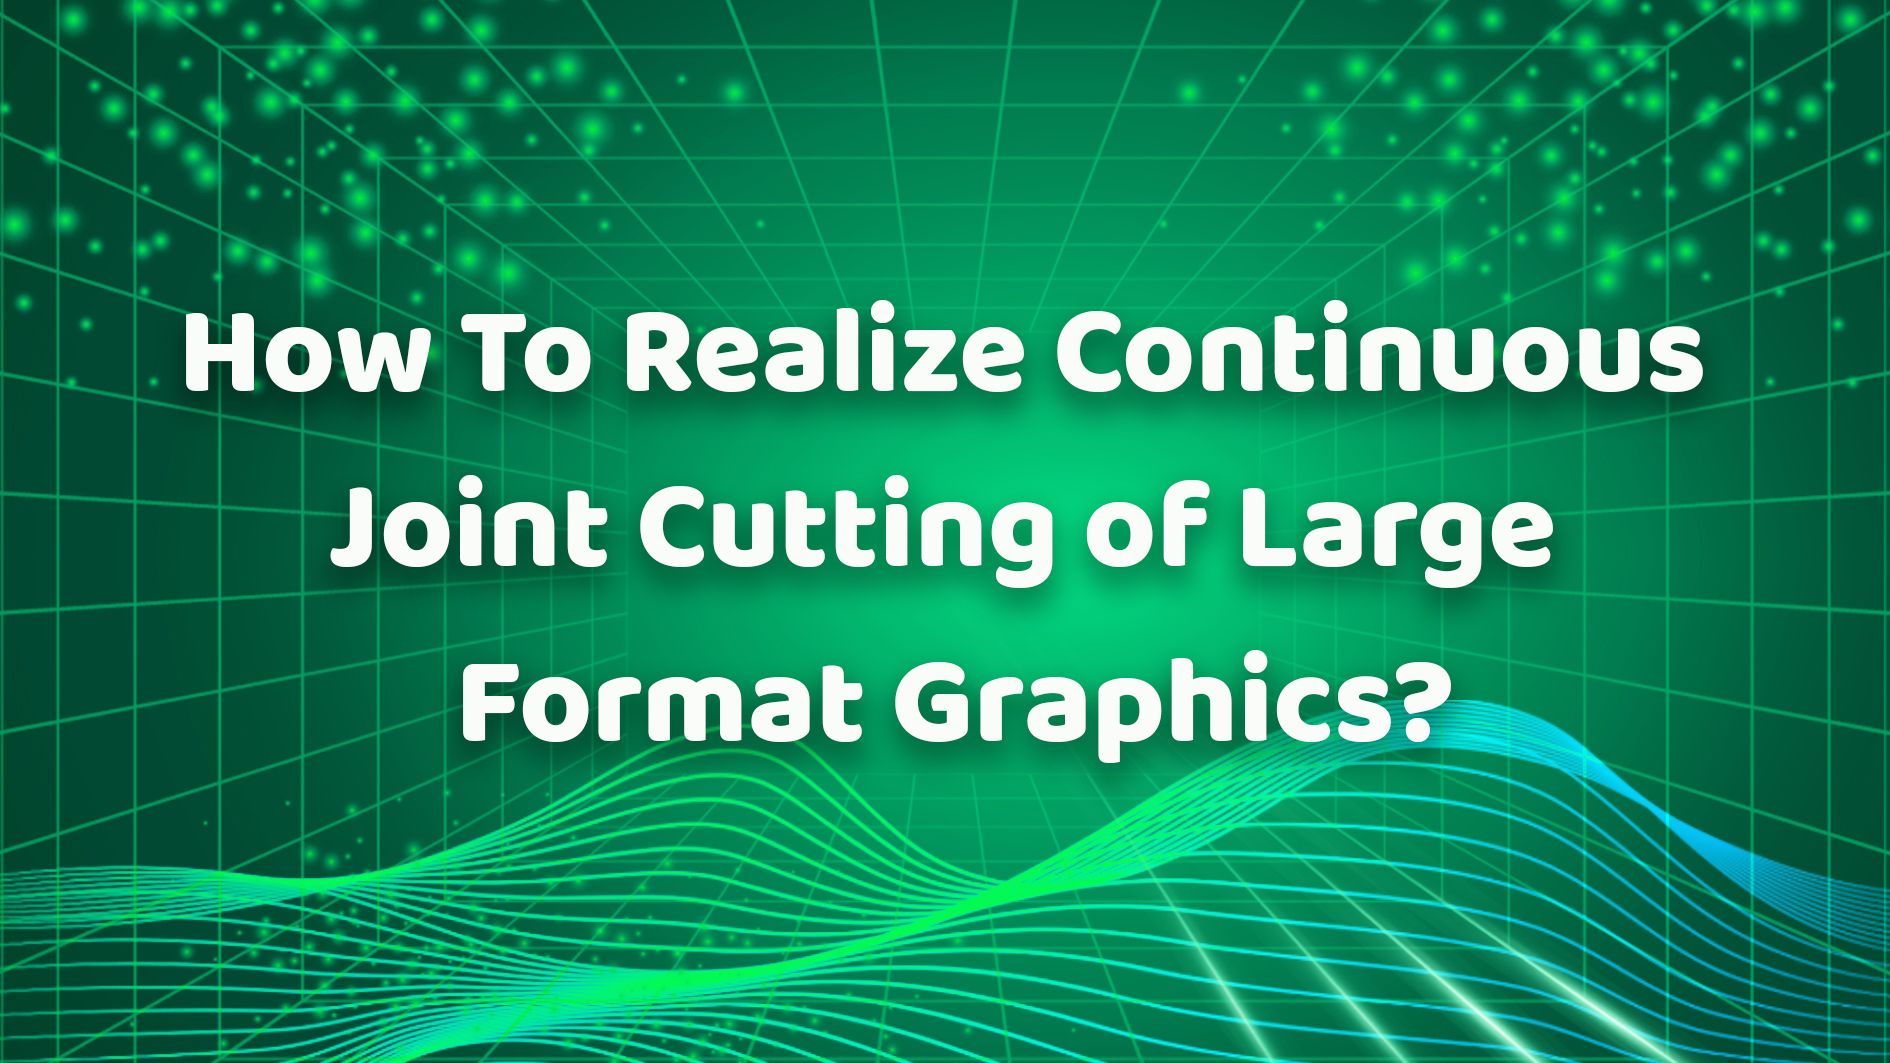 How To Realize Continuous Joint Cutting of Large Format Graphics？